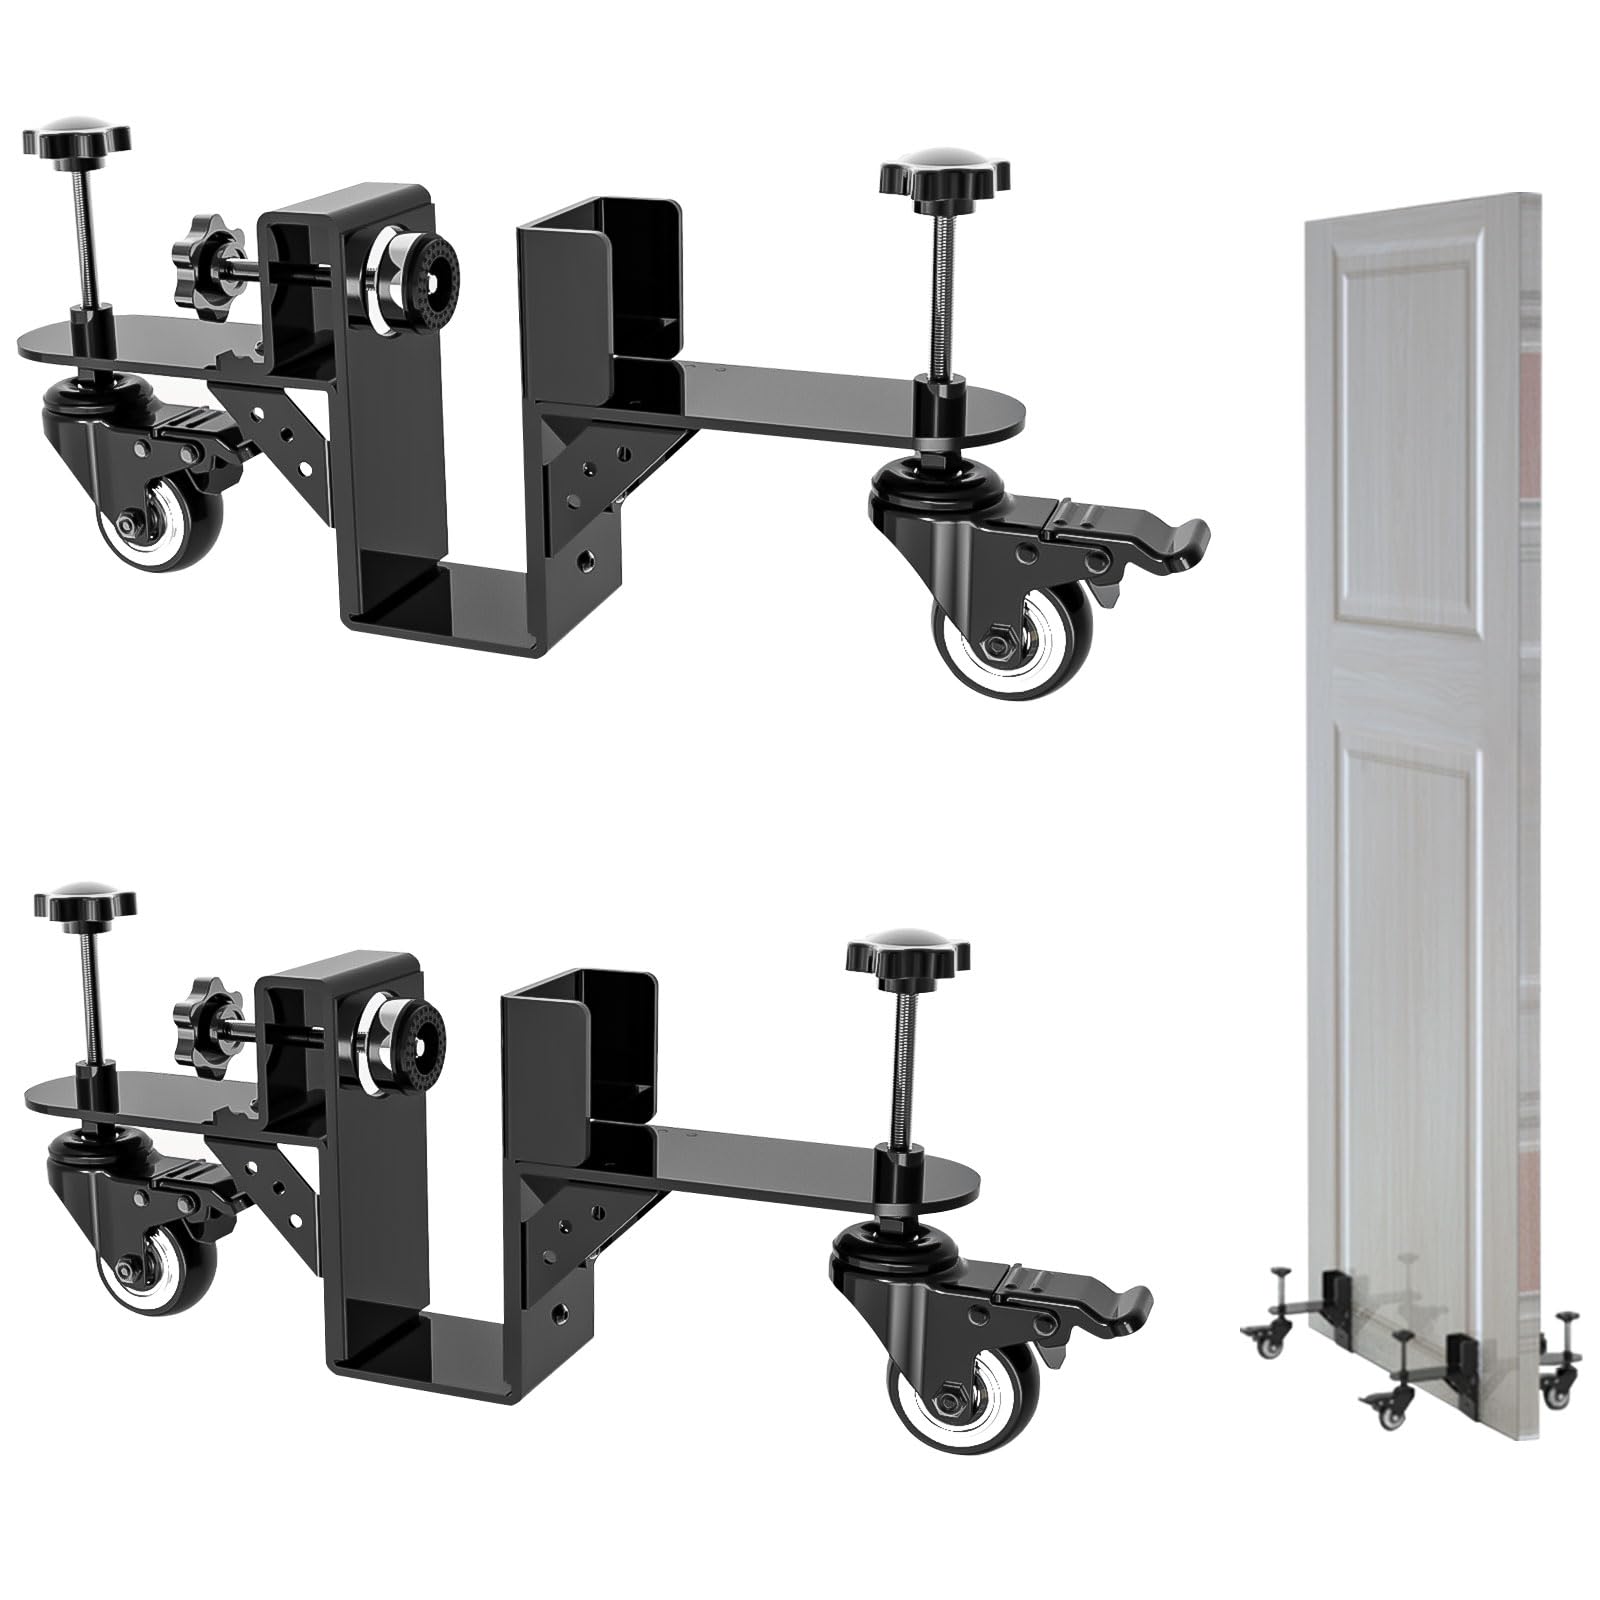 2 Pcs Heavy-Duty Door Dolly and Door Lifter,Installation Tool for Doors 4/5 inchs to 2.4 Inches Thick and 800 Lbs - Maximize Installation Efficiency